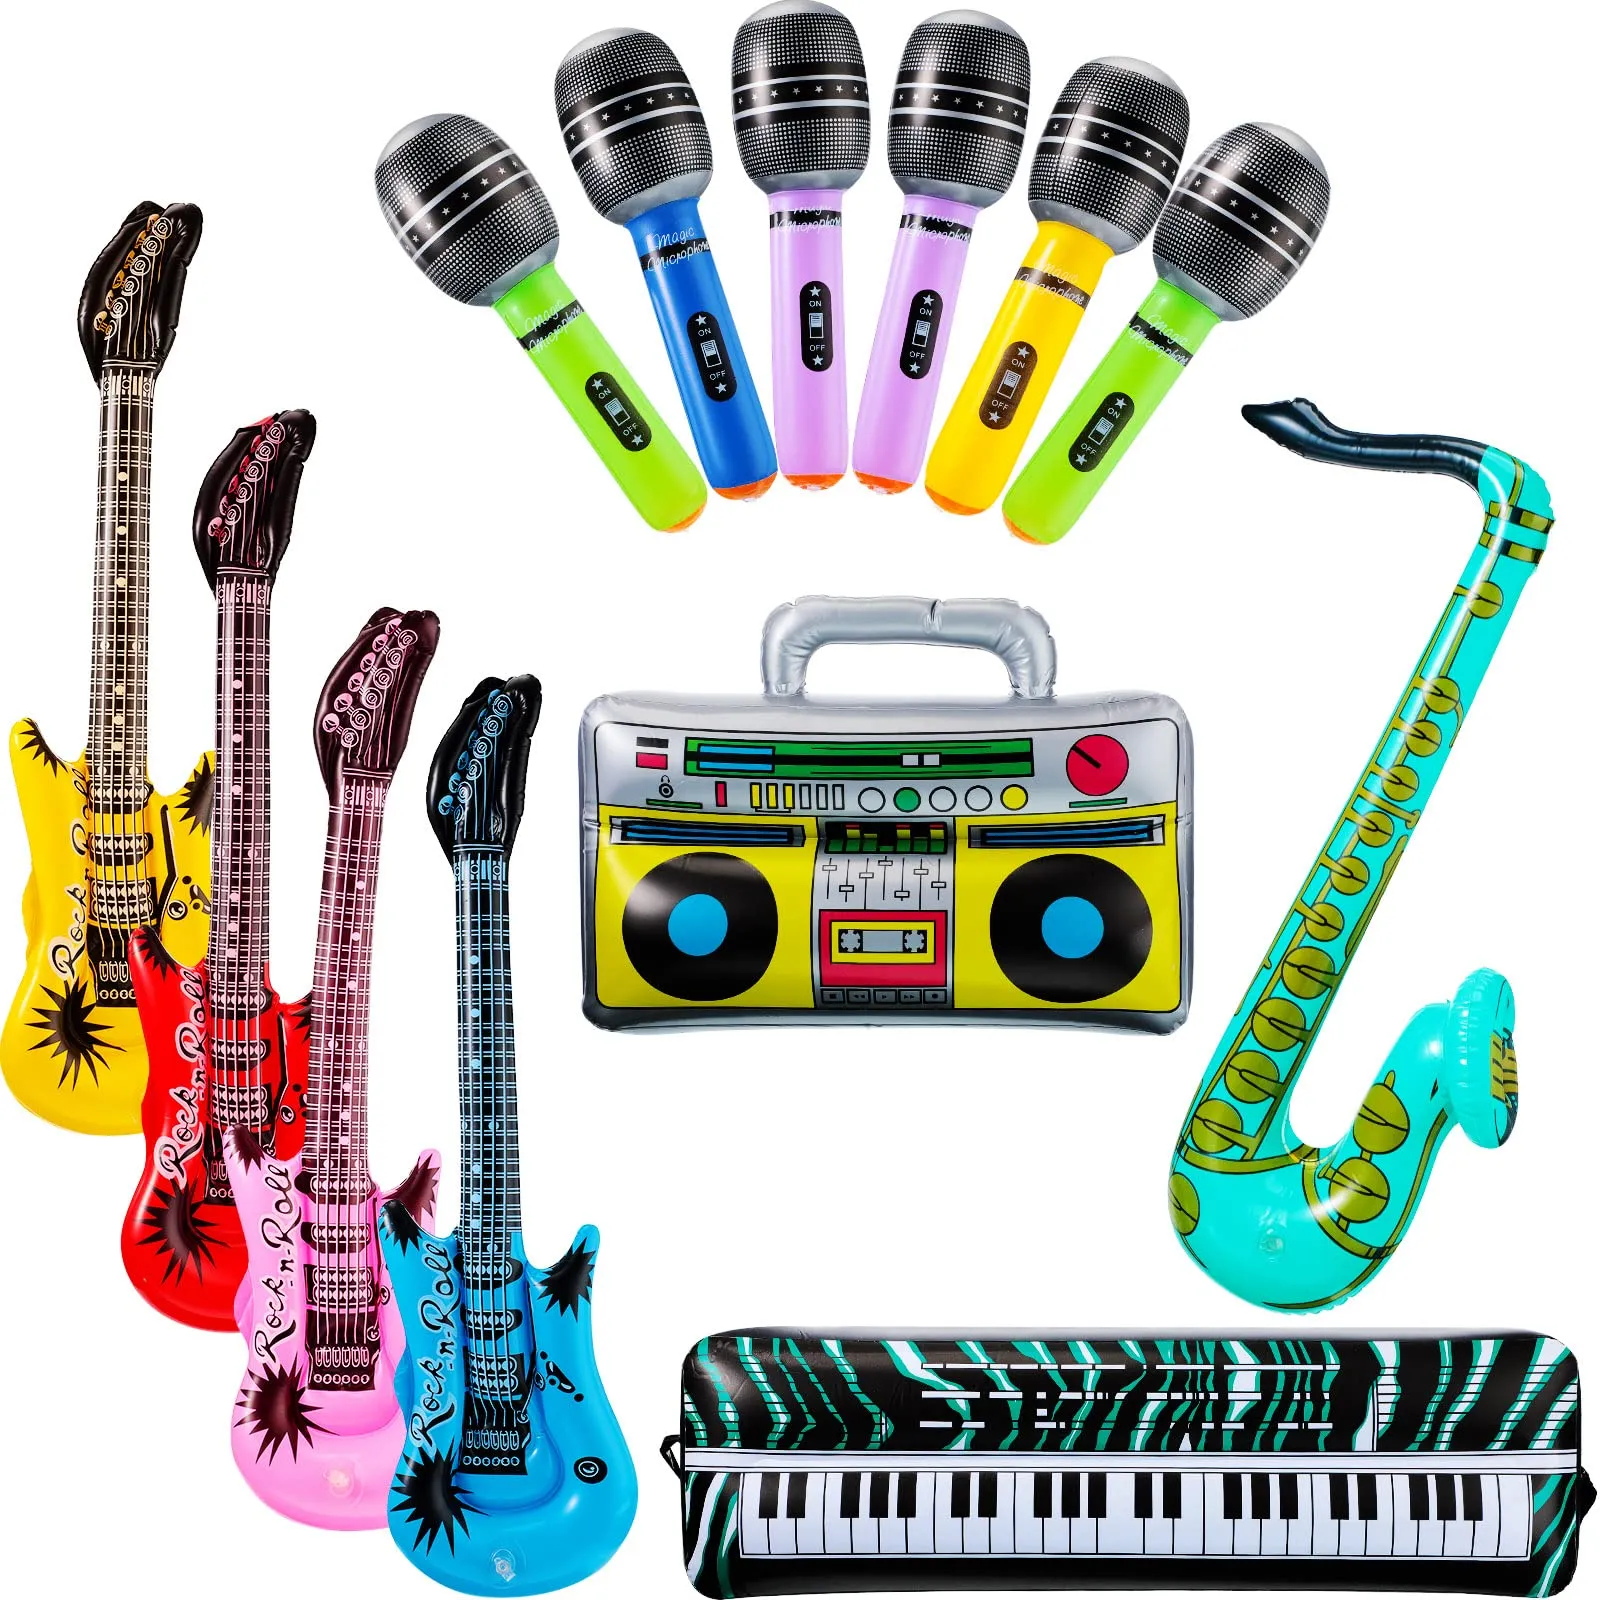 Other Event Party Supplies 13 Pieces/lot Inflatable Rock Star Toy Set 1 Radio 4 Guitar 6 Microphones Saxophone Keyboard Piano Props F amaAo